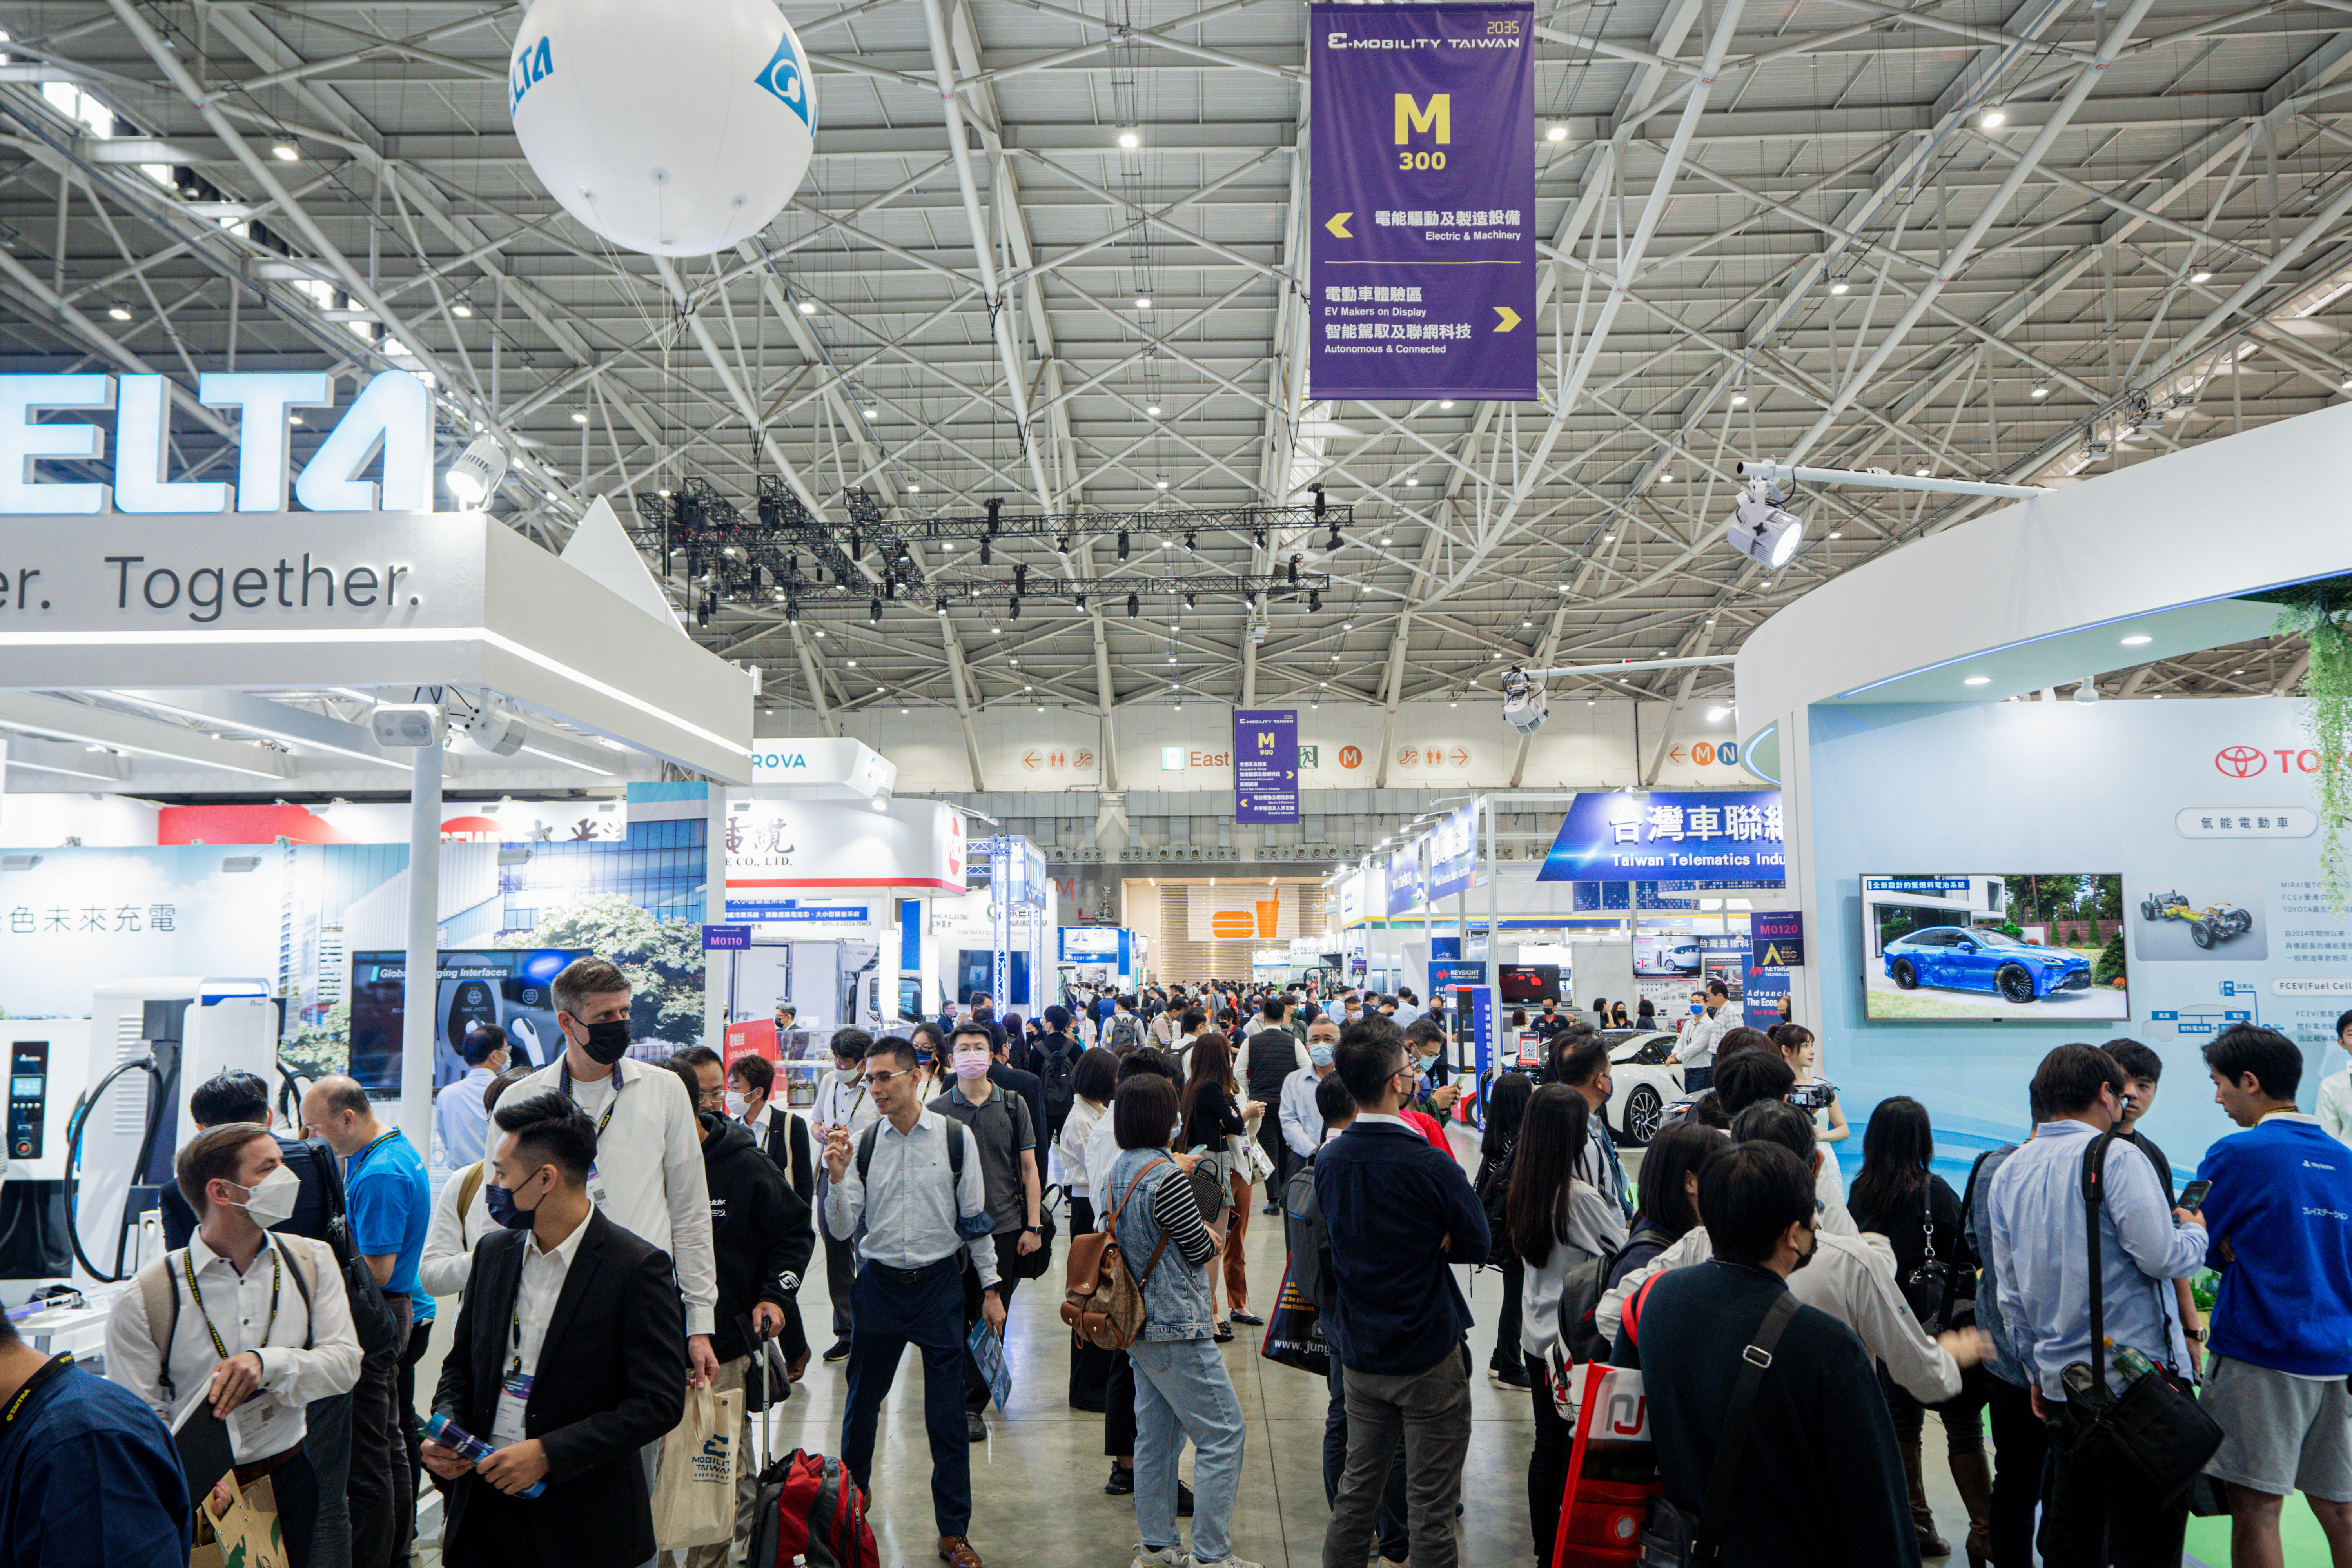 2035 E-Mobility Taiwan is Taiwan’s premier trade show focusing on the smart mobility ecosystem, connecting industry players and generating new businesses.